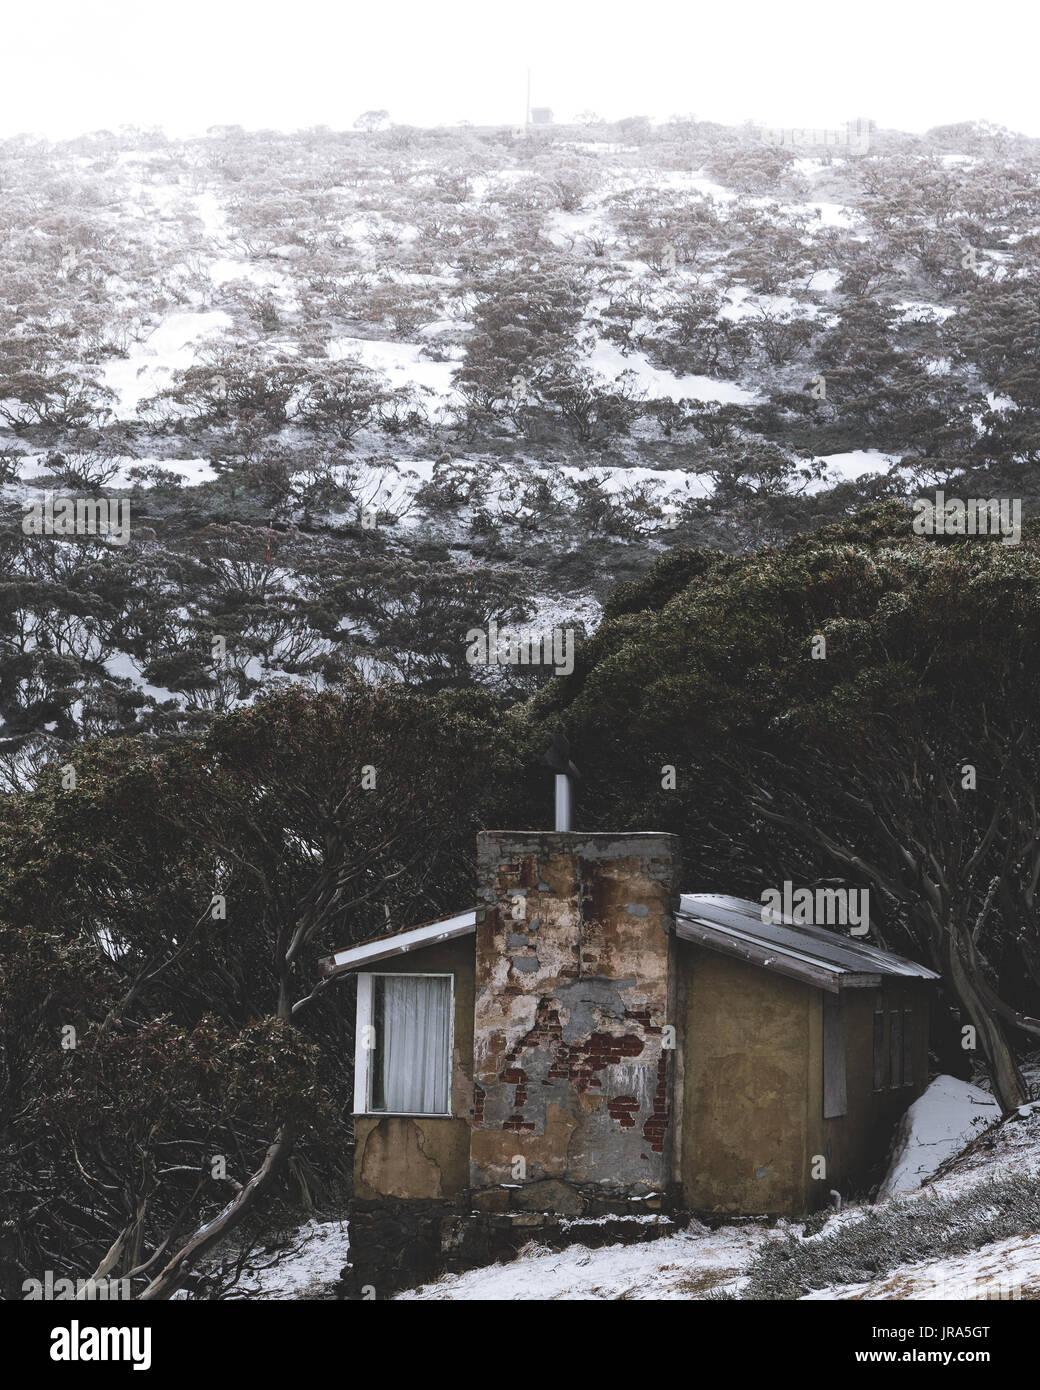 Abandoned house on the way up to Mount Hotham covered in snow. Stock Photo